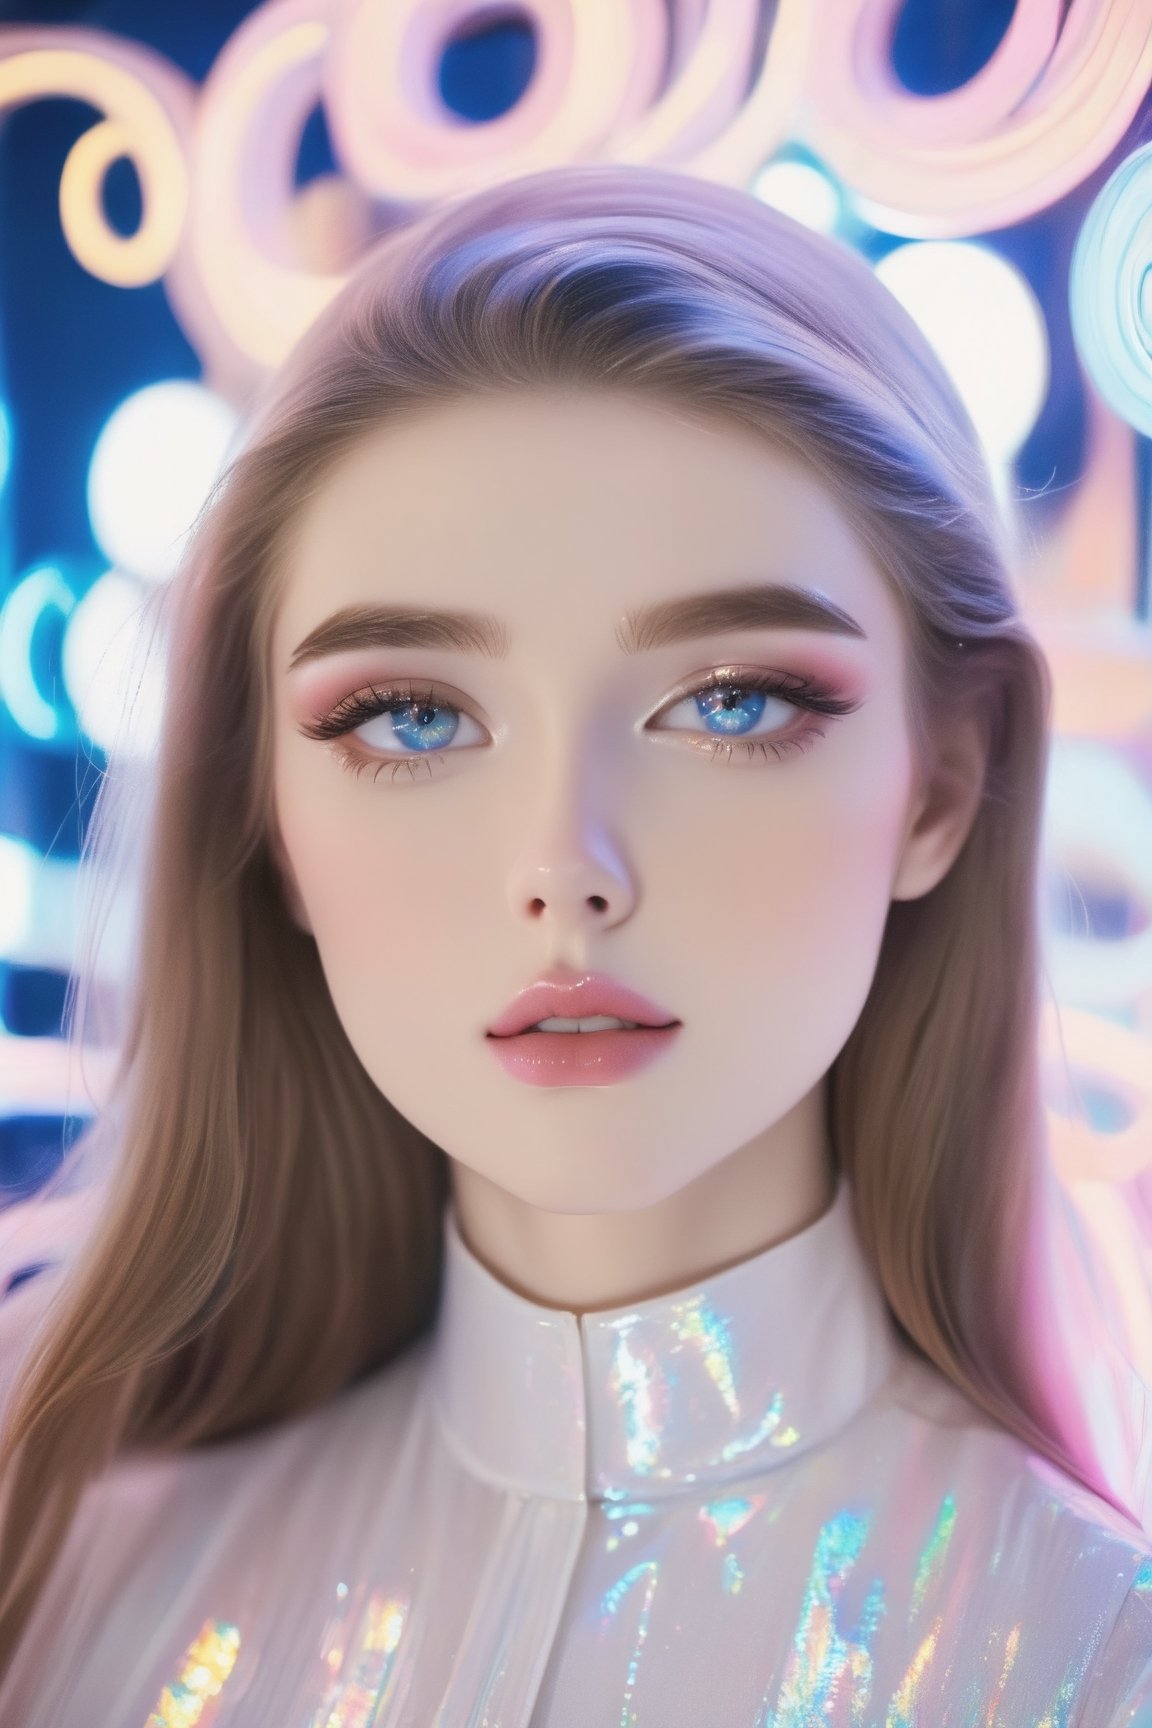 portrait, A young model, a stunning girl with big bright eyes, with long straight brown hair, dressed in mother-of-pearl white clothes that shimmer like a translucent neon sign, causing a feeling of light, renewal and brightness - neon photography style, fine porcelain skin like a vintage doll, light pink and blue veins are visible, gentle make-up on the face, iridescent glitters on the eyelids and lips, K-Eyes